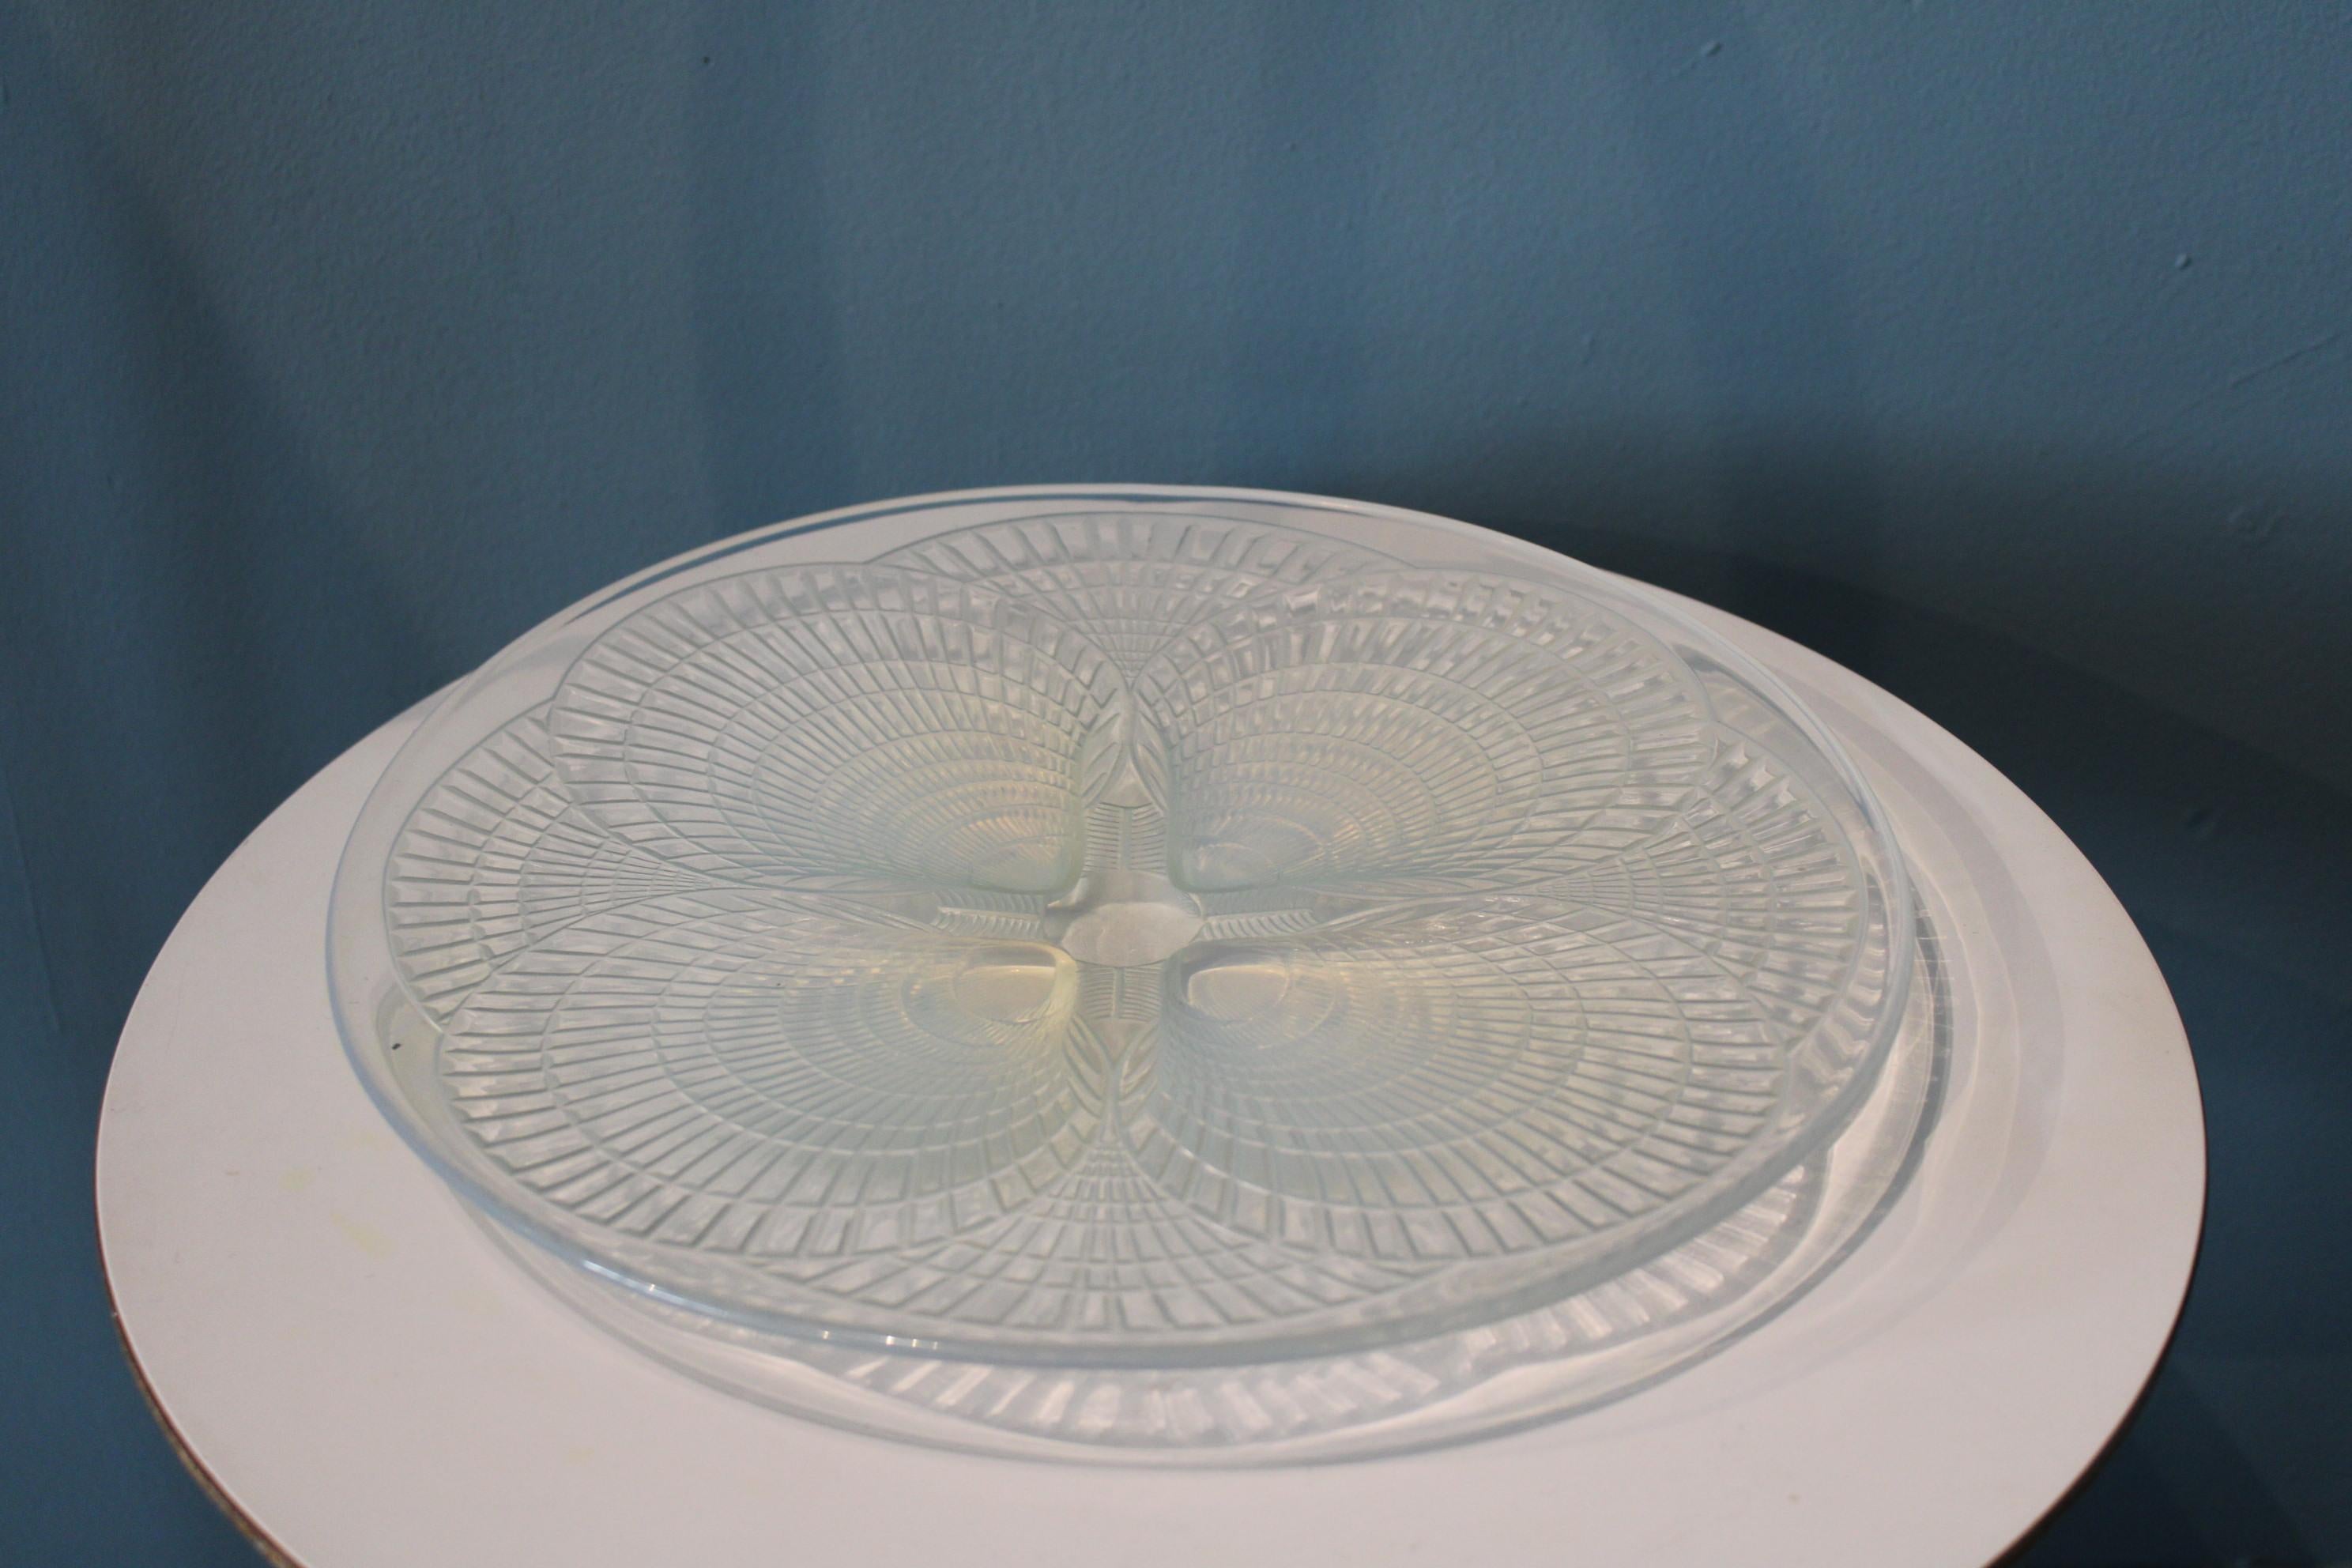 Plate with scallops, by René Lalique (1860-1945)
Signed R.LALIQUE in the center of the plate.